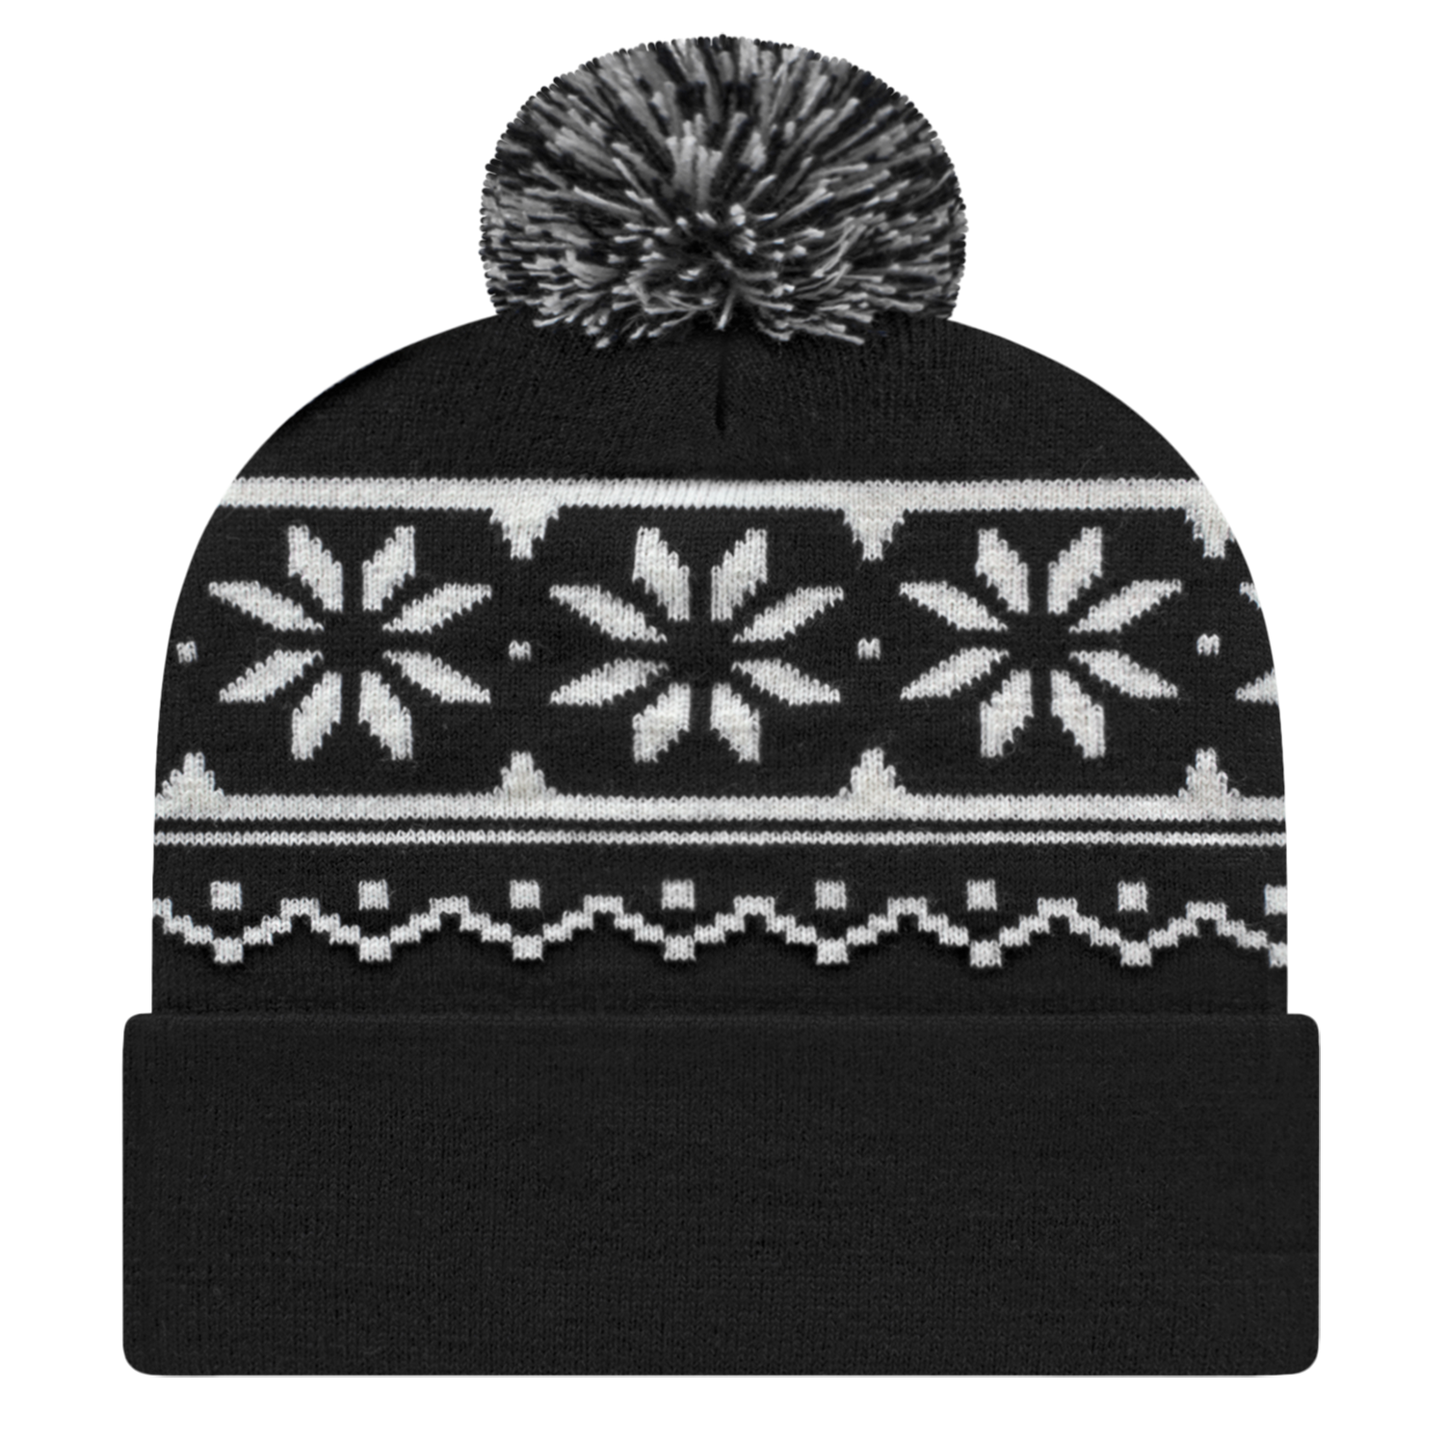 Snowflake Knit Cap with Cuff